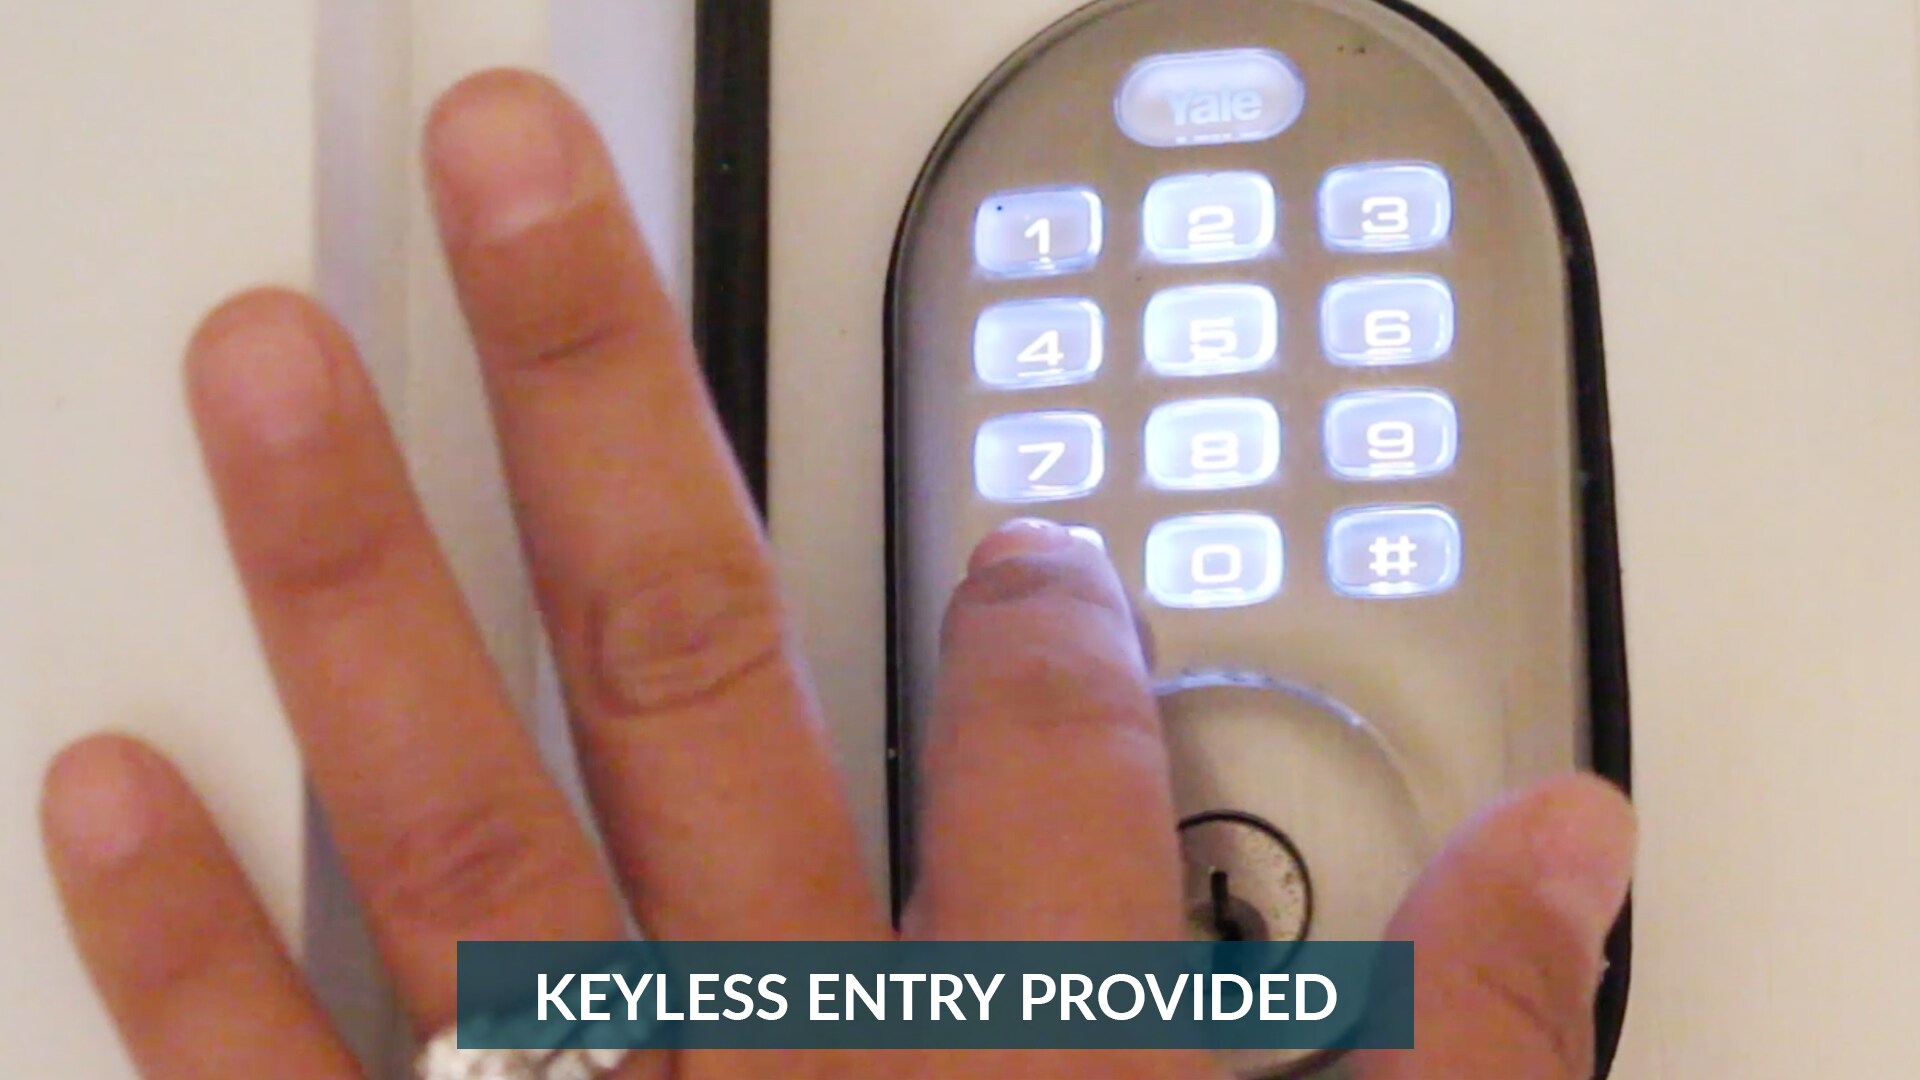 Contactless keyless entry provided.